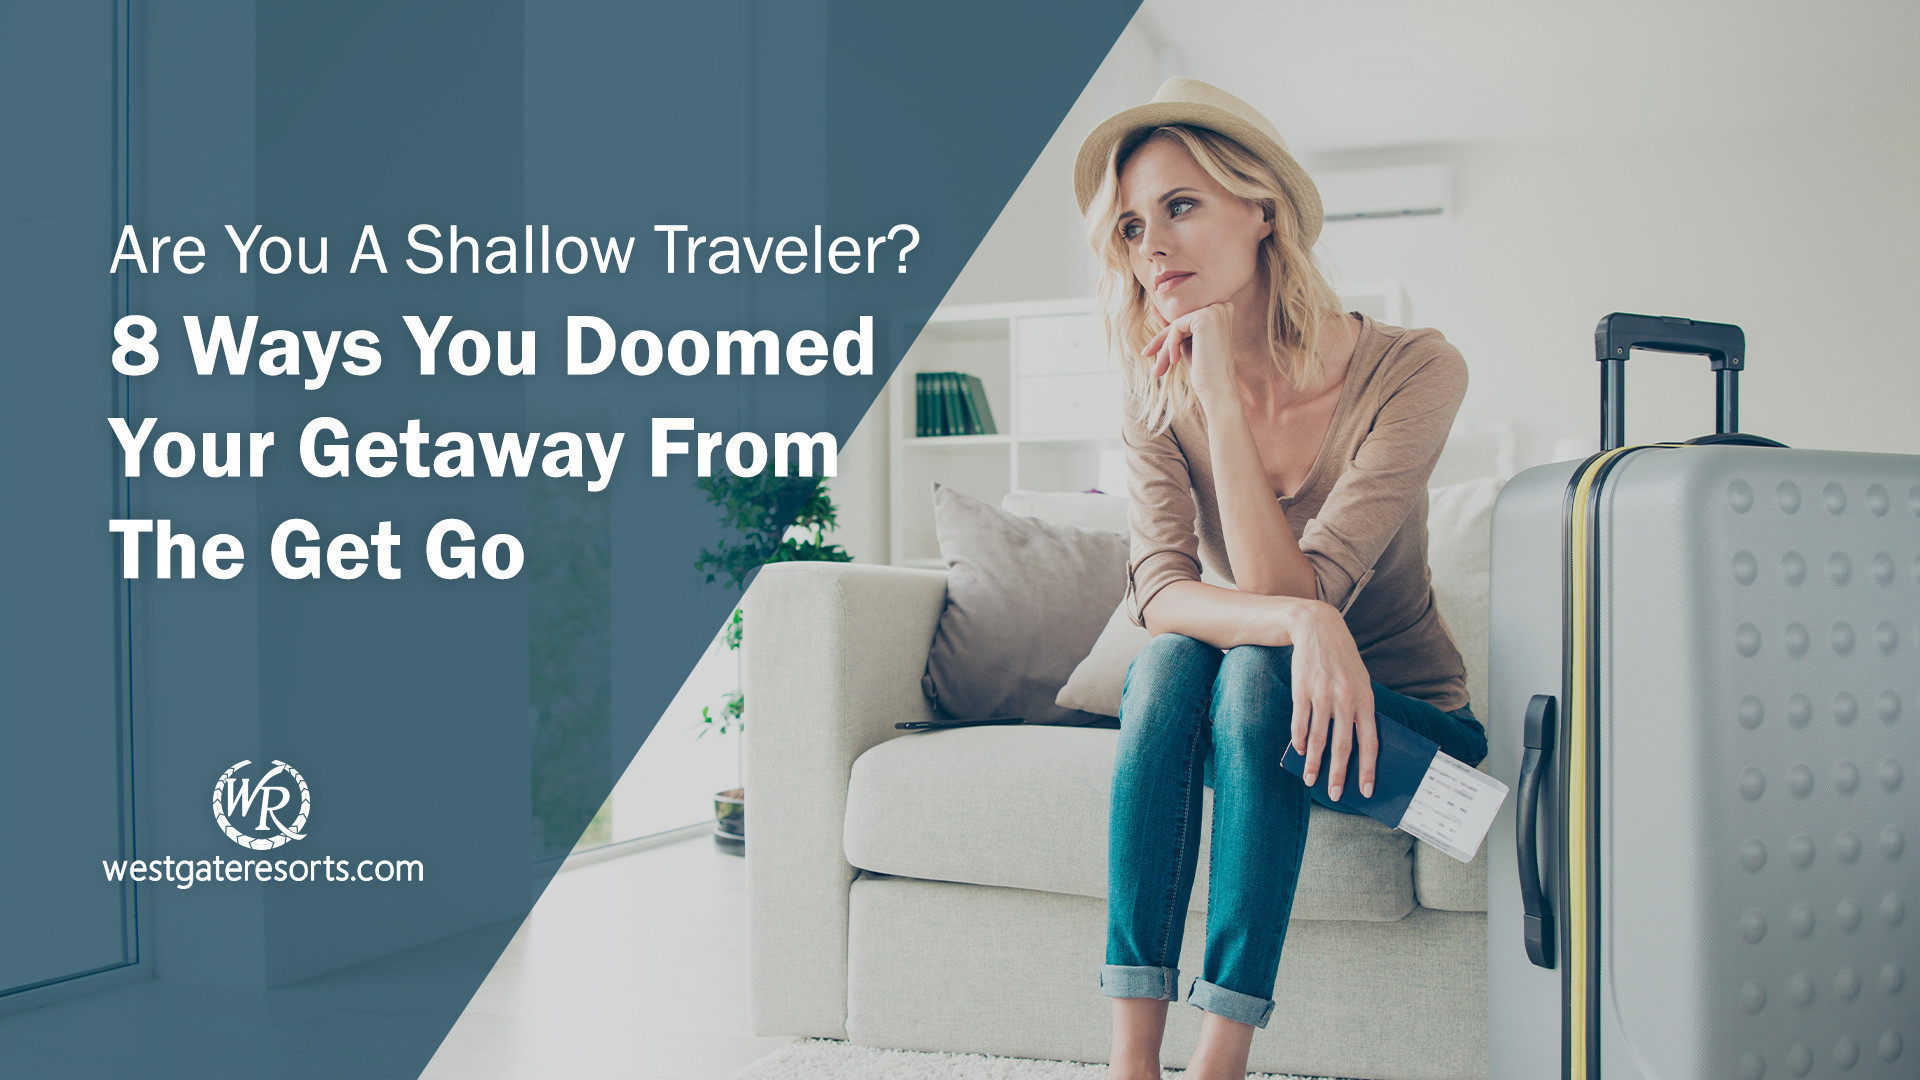 Are You A Shallow Traveler? 8 Ways You Doomed Your Getaway From The Get Go